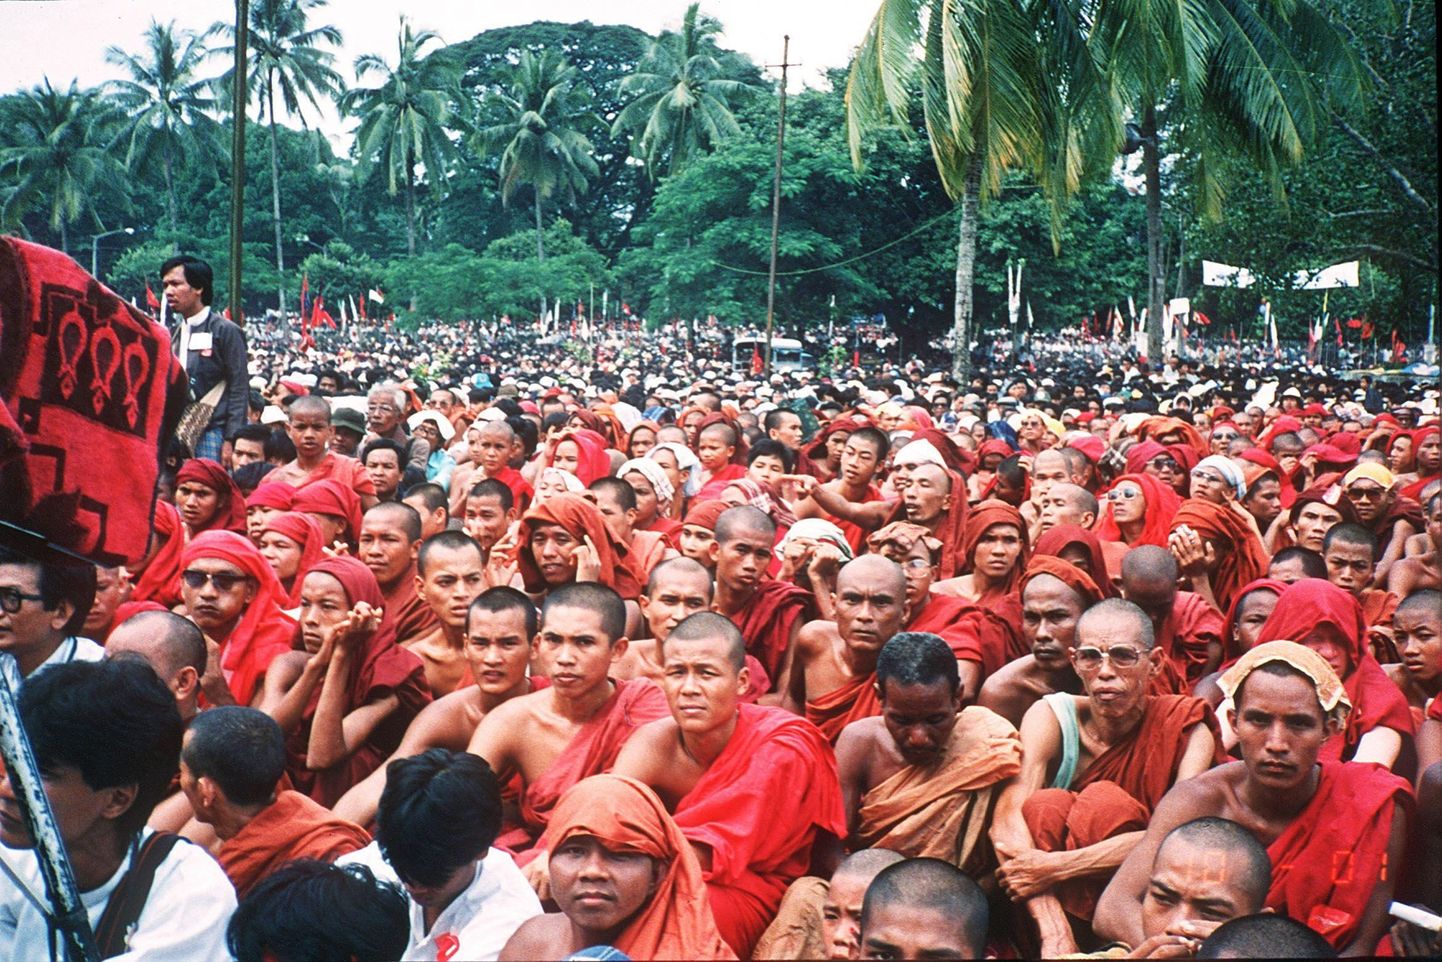 Birma mungad kuulamas opositsiooni liidri Aung San Suu Kyi kõnet, mille ta pidas 20 aasta eest Yangonis.

27, 1988, Buddhist monks listen to unseen opposition leader Aung San Suu Kyi during a rally held in Yangon.   As China celebrates the start of the Olympics on August 8, 2008, with much fanfare, activists in neighbouring Myanmar will silently mourn the bloody end of an uprising that crushed their dreams of democracy 20 years ago. In August 1988, cities and villages across the country then known as Burma were bursting with optimism. The military dictator Ne Win had just stepped down after decades of iron-fisted rule, and Burma was inspired by a prophecy that it would become a free nation on August 8 -- known as 8-8-88. Students who had already protested for almost a year against Ne Win's socialist government called for a national uprising on the auspicious date, drawing activists, Buddhist monks, and even young military cadets into the streets clamouring for freedom.  AFP PHOTO/STR/FILES